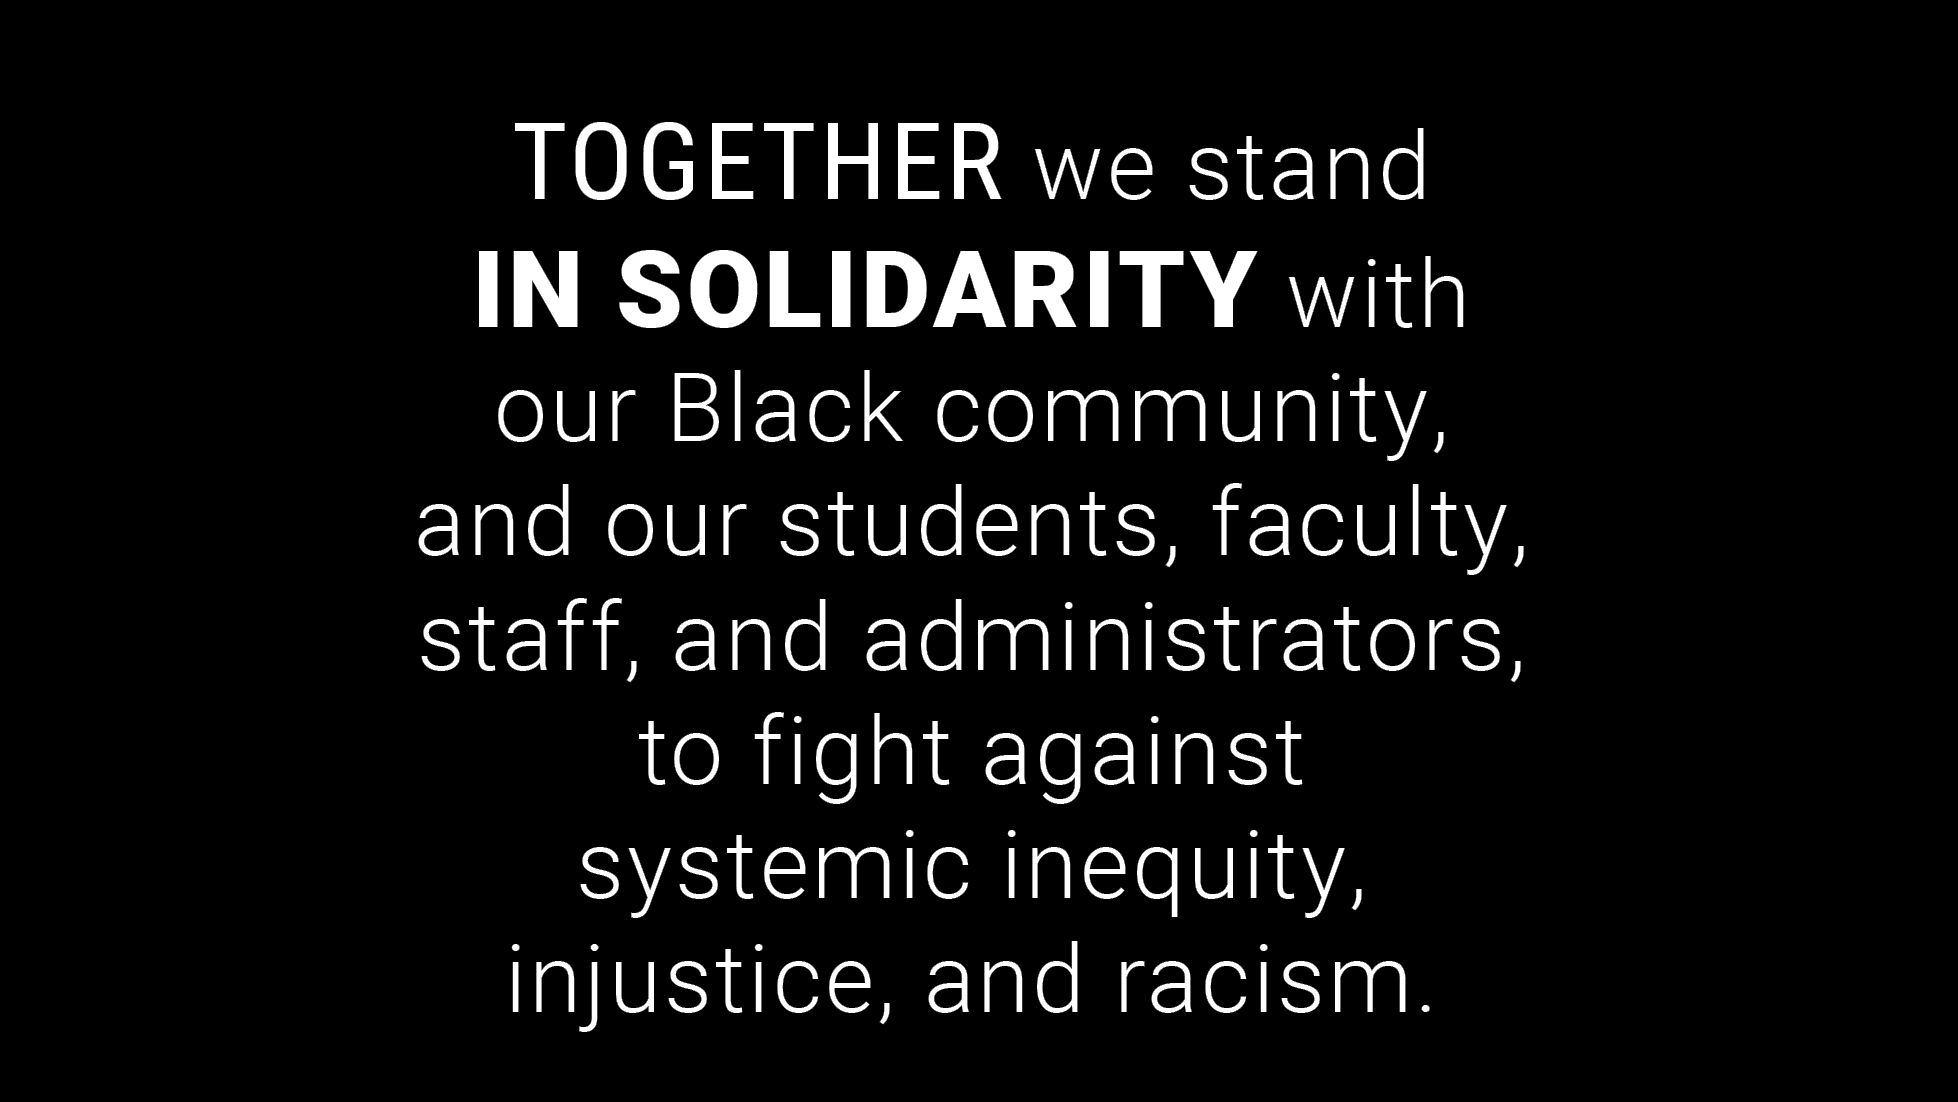 Together we stand in solidarity with our Black community, and our students, faculty, staff, and administrators, to fight against systemic inequity, injustice, and racism.